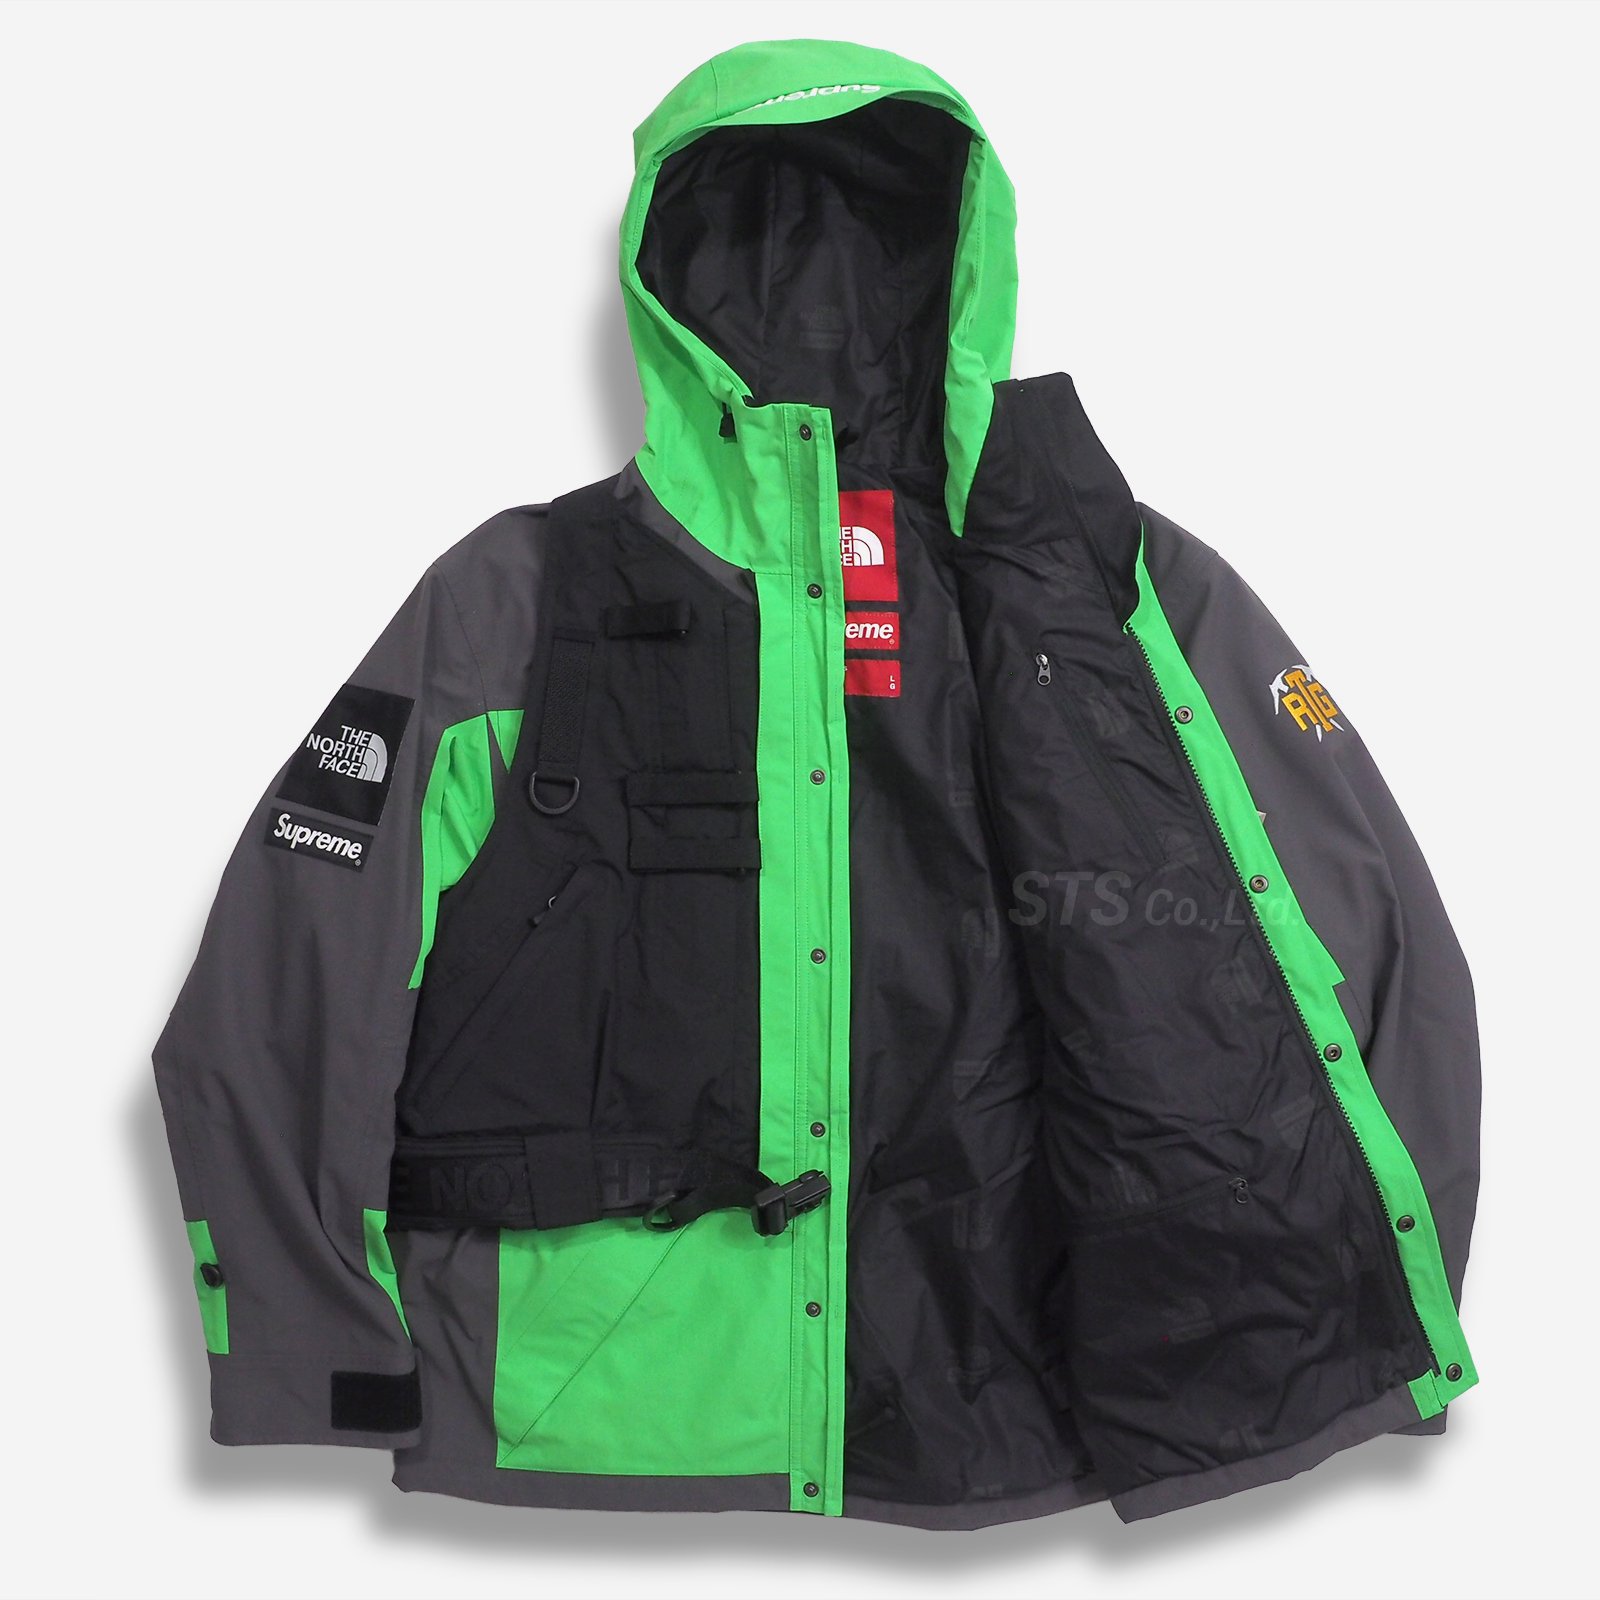 SUPREME THE NORTH FACE 20ss L 緑 RTG